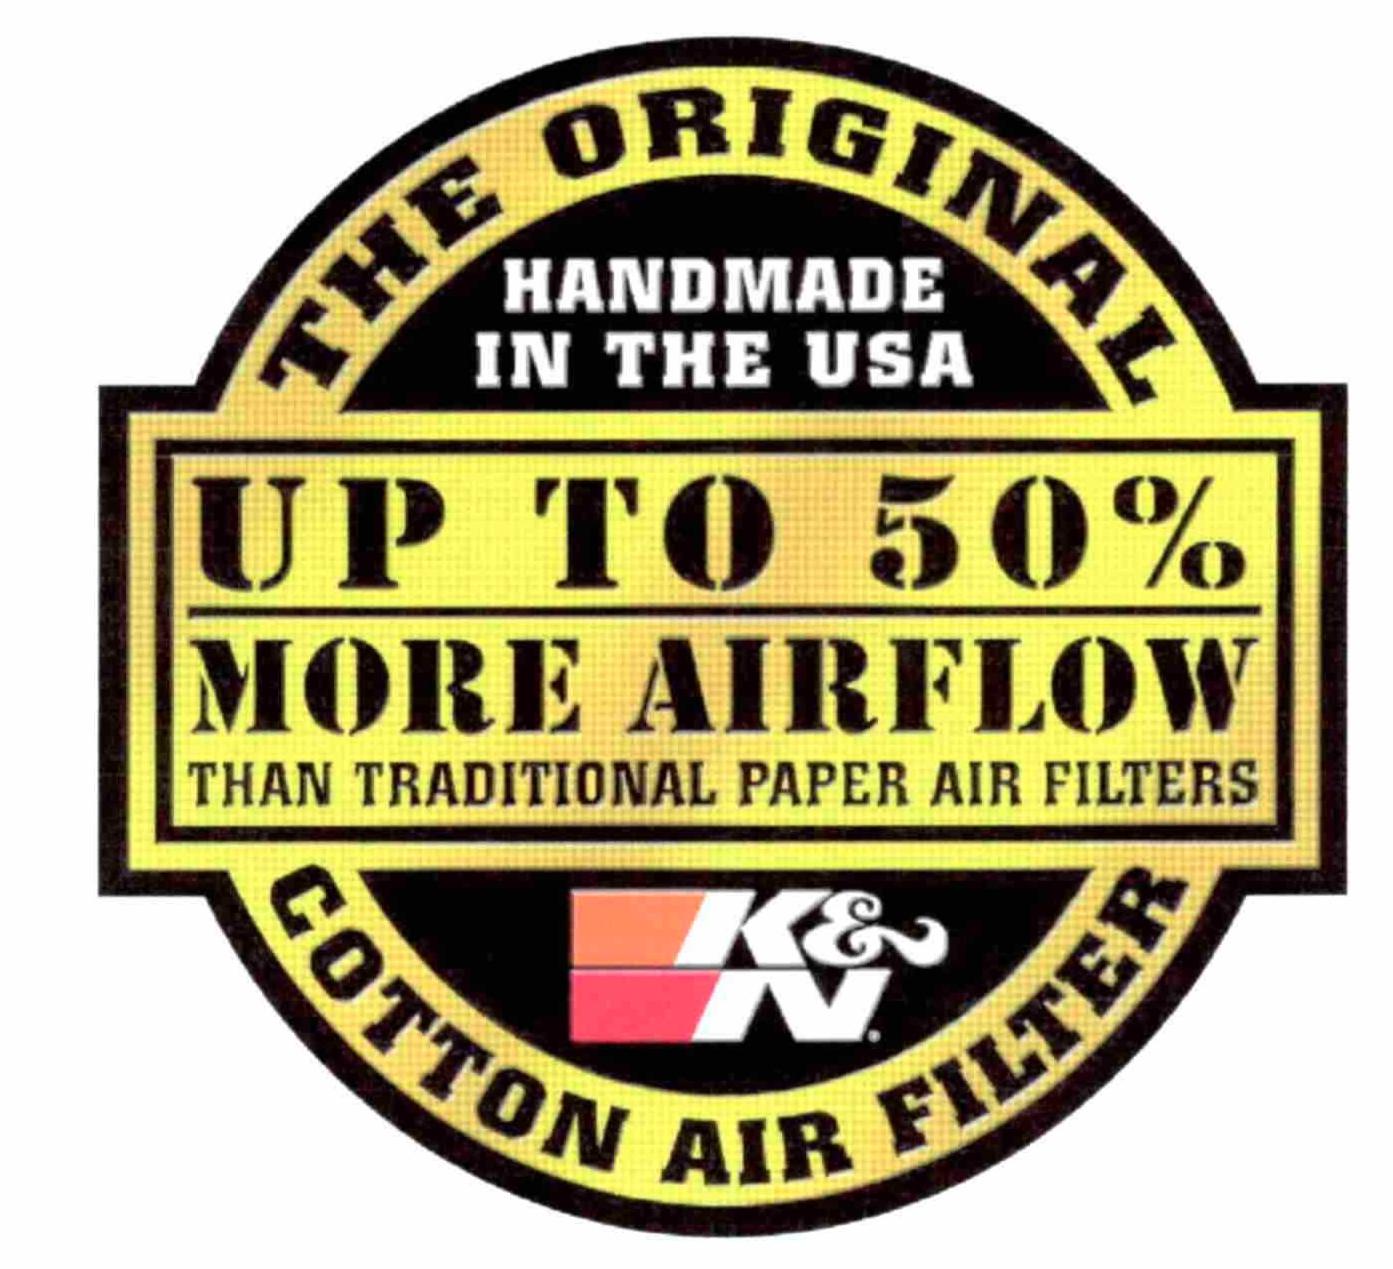  UP TO 50% MORE AIRFLOW THAN TRADITIONAL PAPER AIR FILTERS THE ORIGINAL COTTON AIR FILTER HANDMADE IN THE USA K&amp;N